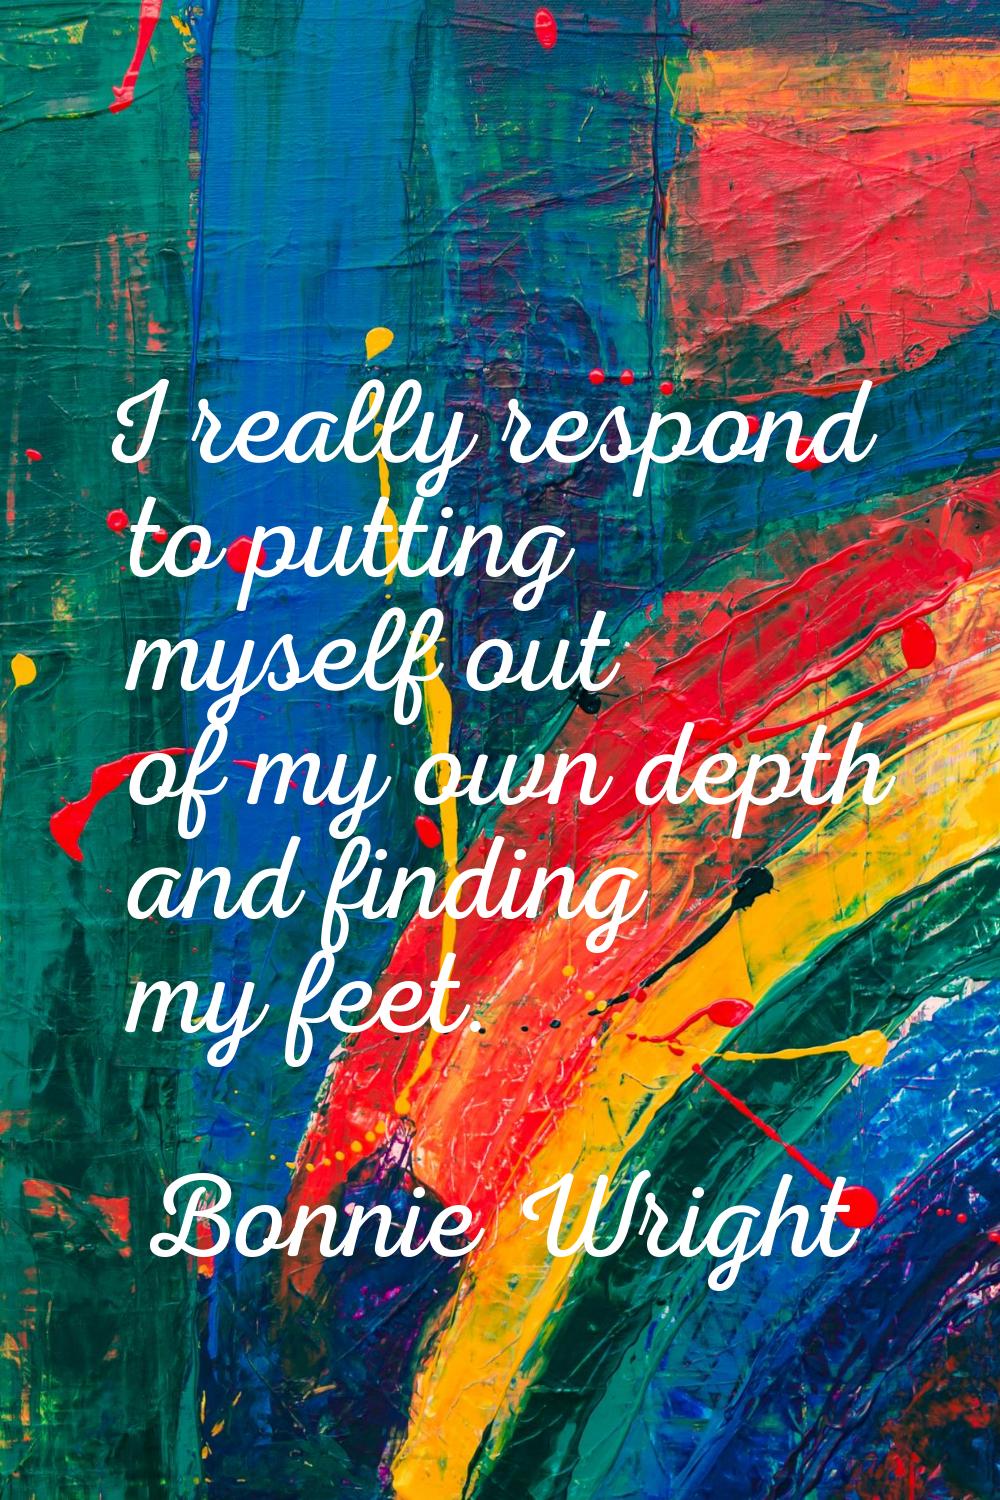 I really respond to putting myself out of my own depth and finding my feet.